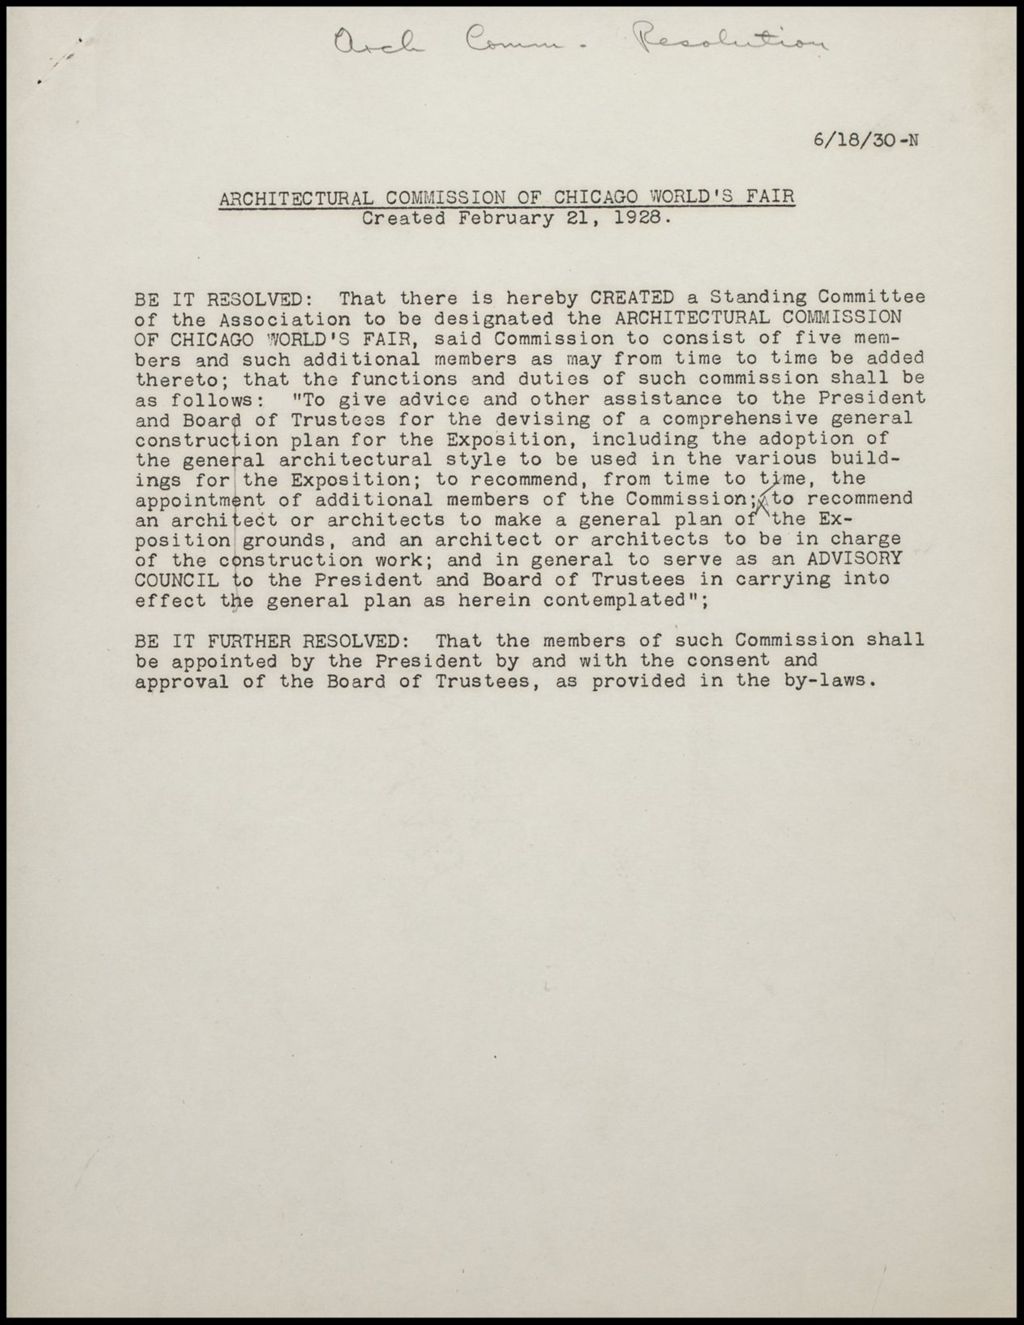 Miniature of Architectural Committee - resolutions, ca. 1933-1934 (Folder 5-44)